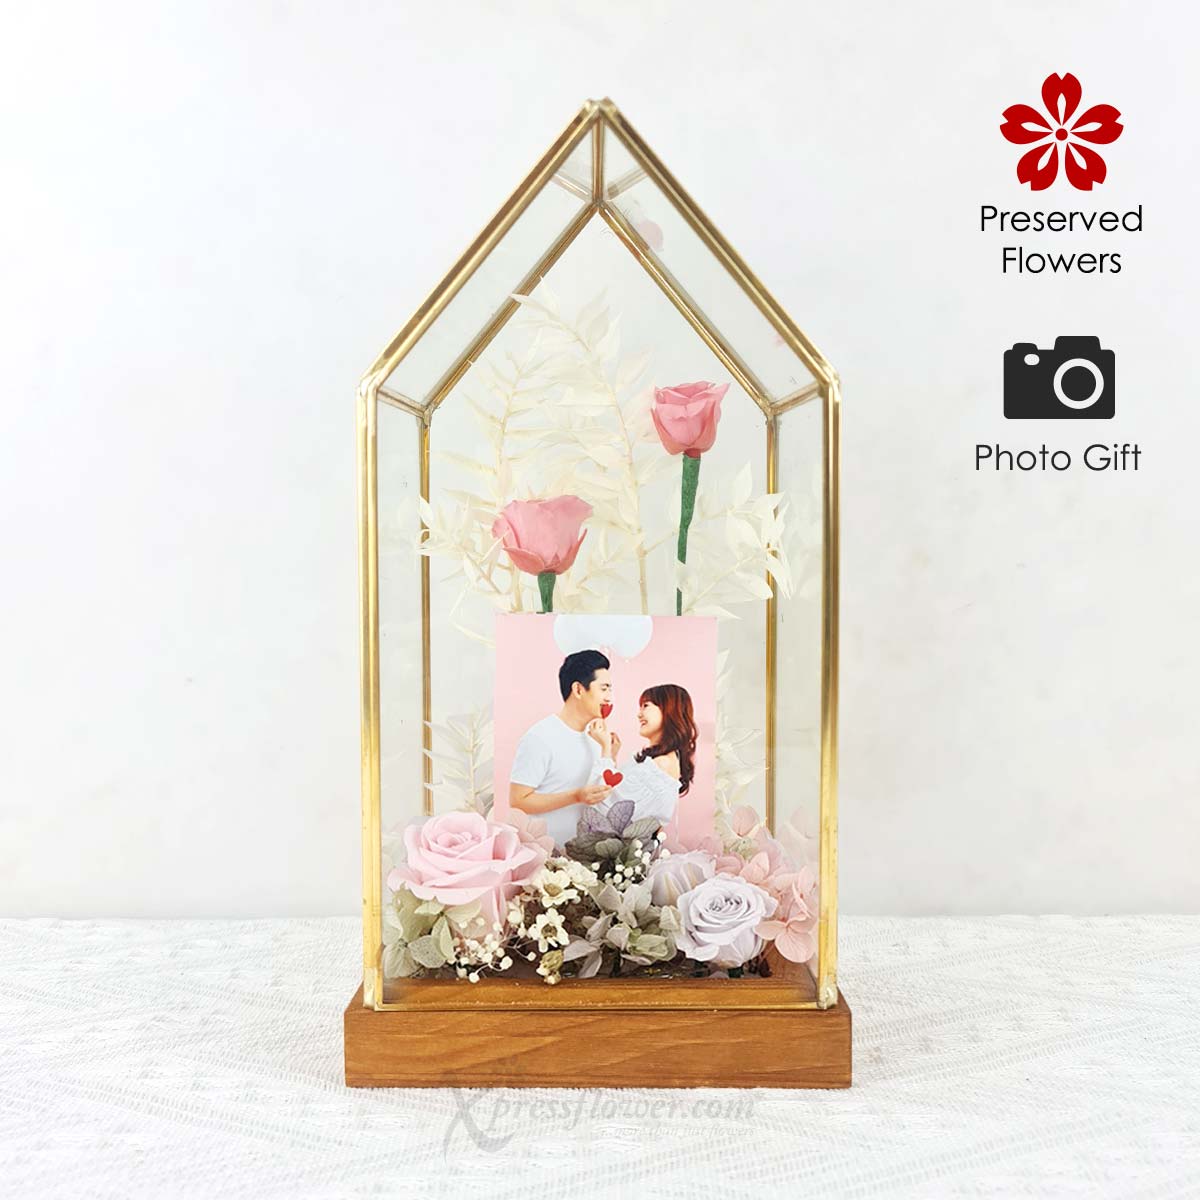 PR2304 Romance Mansion Preserved Flowers with Personalised Photo) 1C